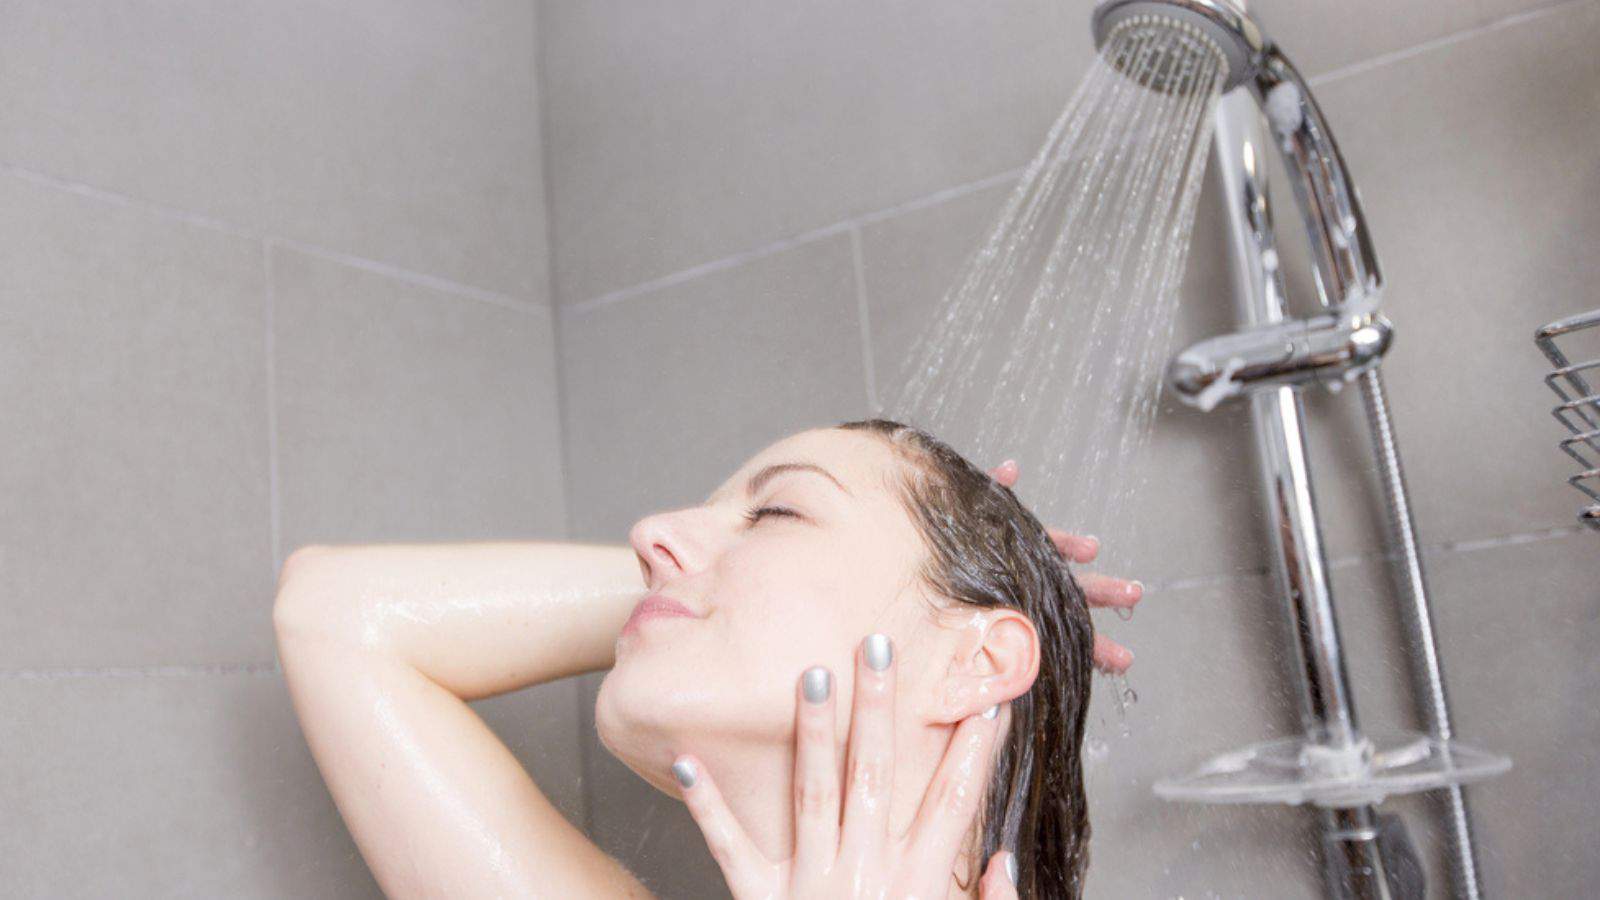 Woman in shower washing hair with shampoo